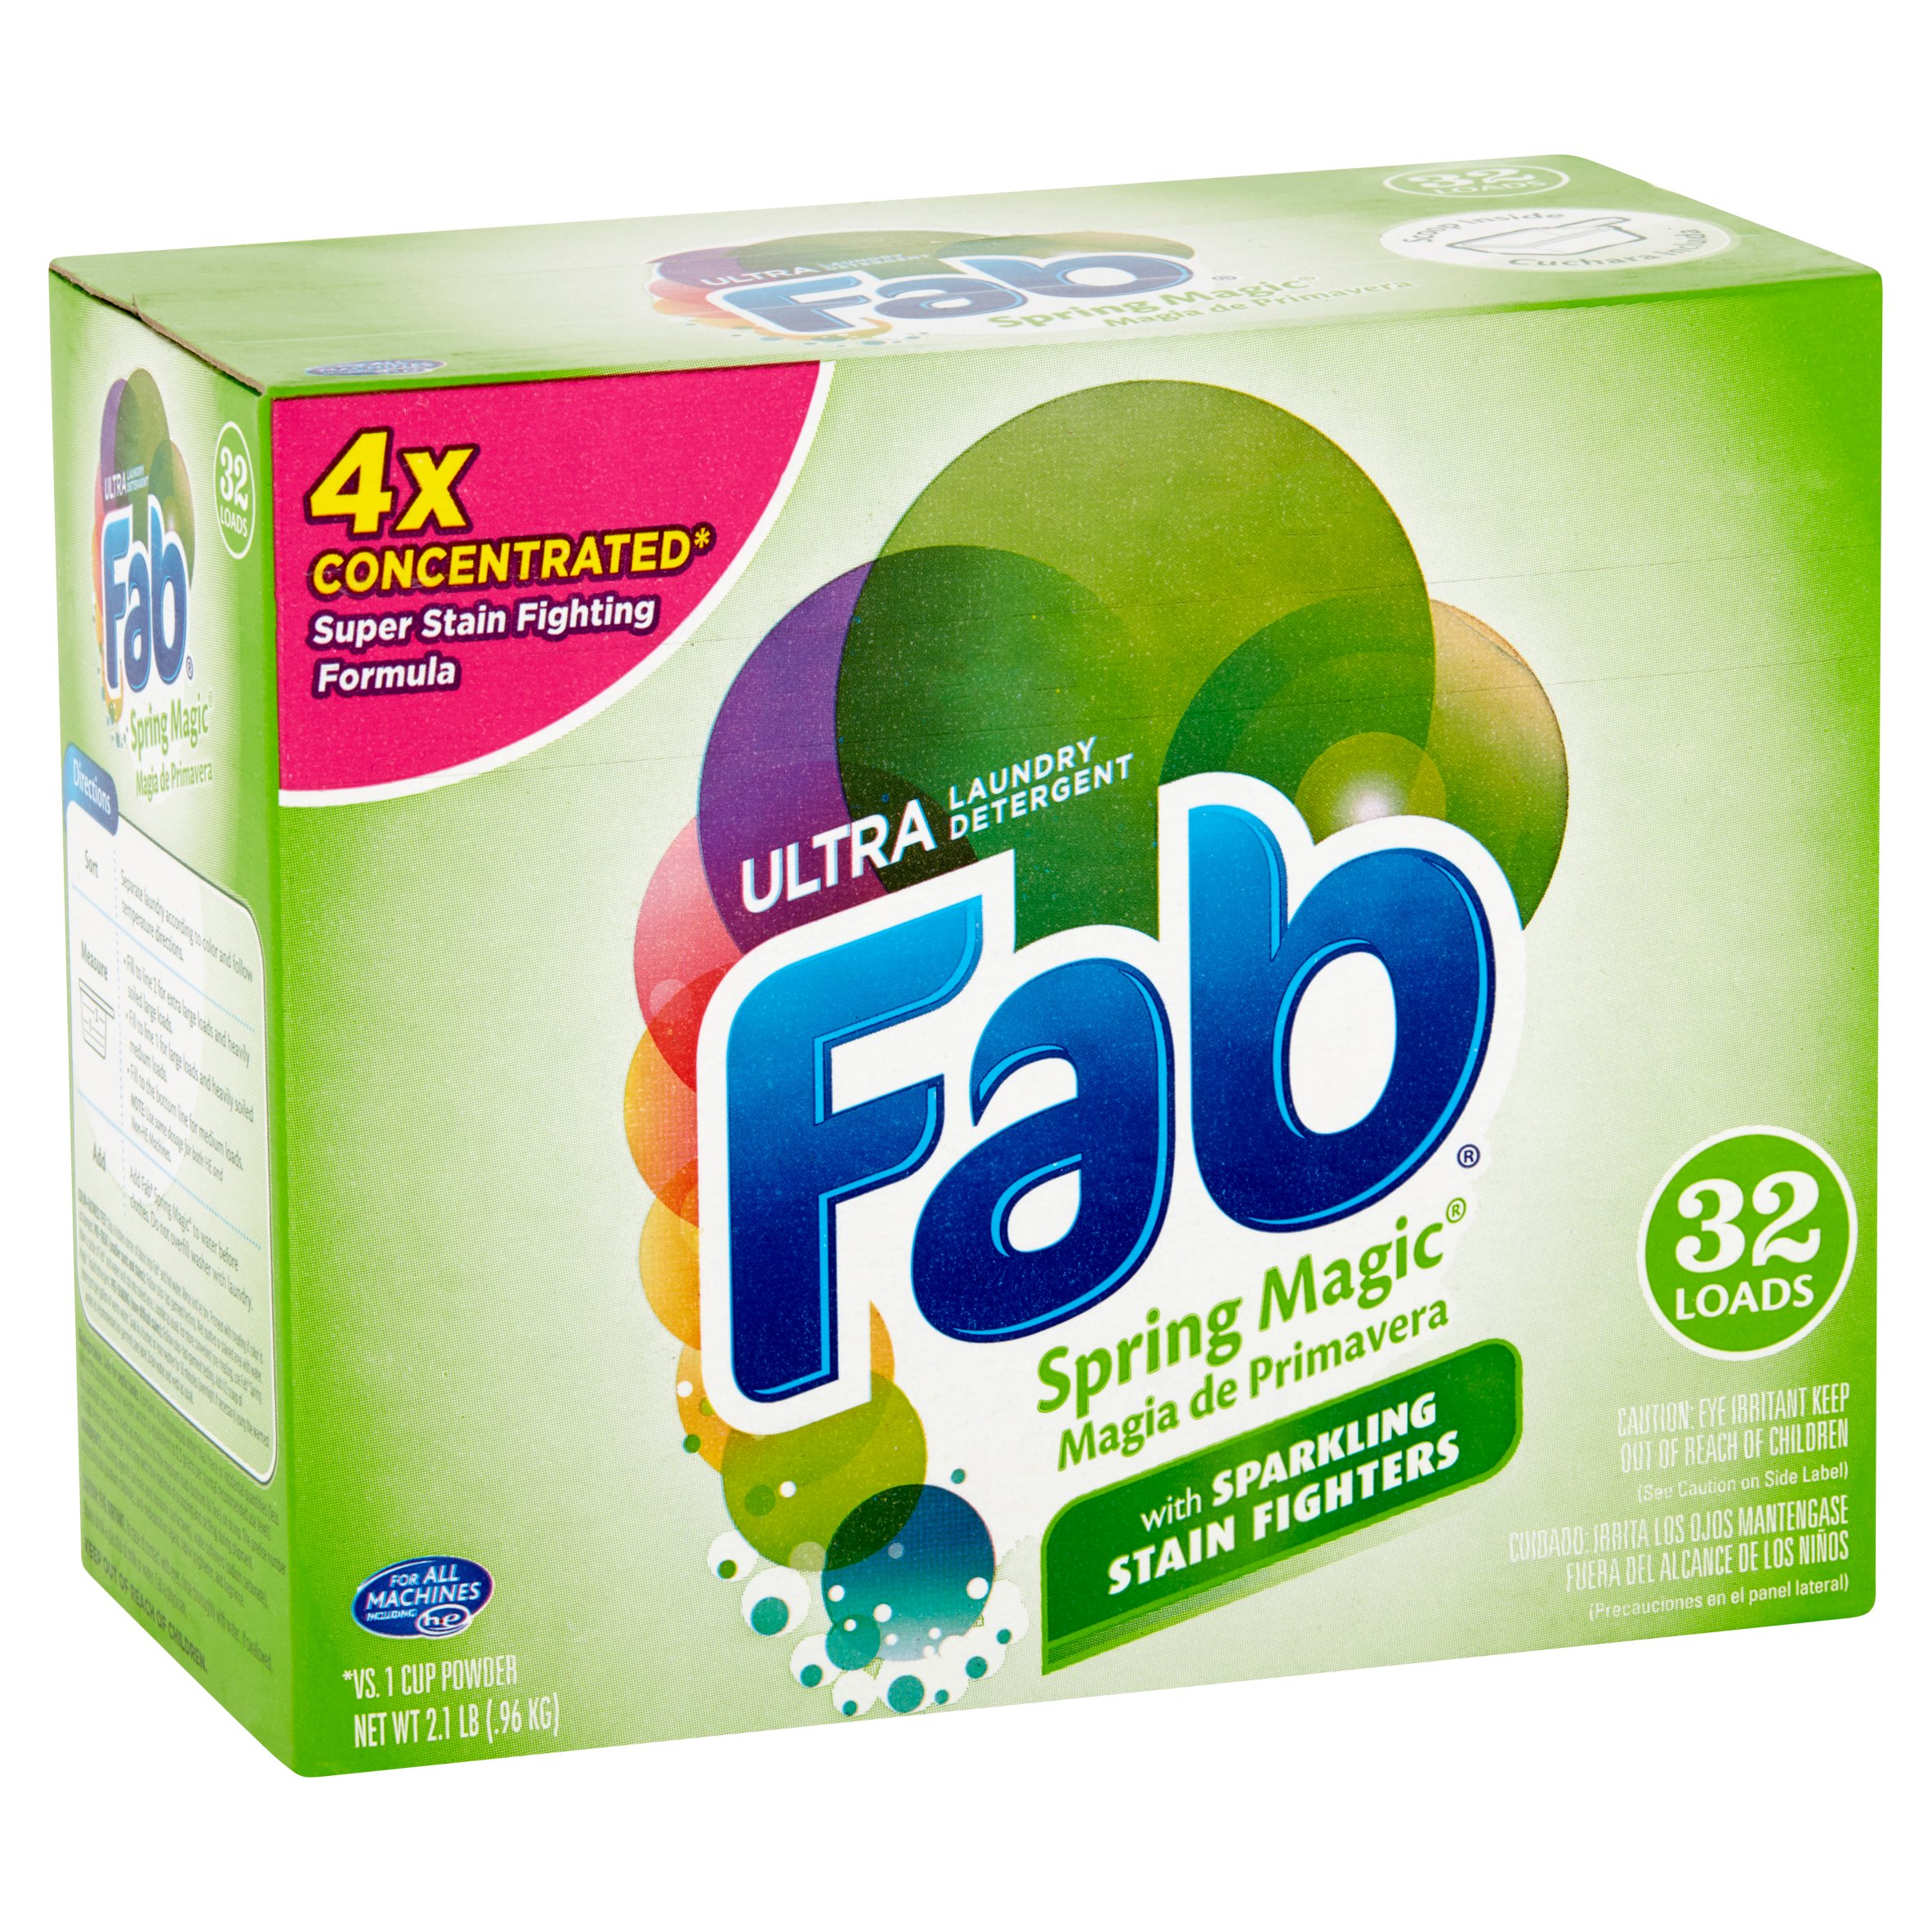 Ultra Fab Spring Magic Powder Laundry Detergent, 2.1 lbs - image 2 of 4